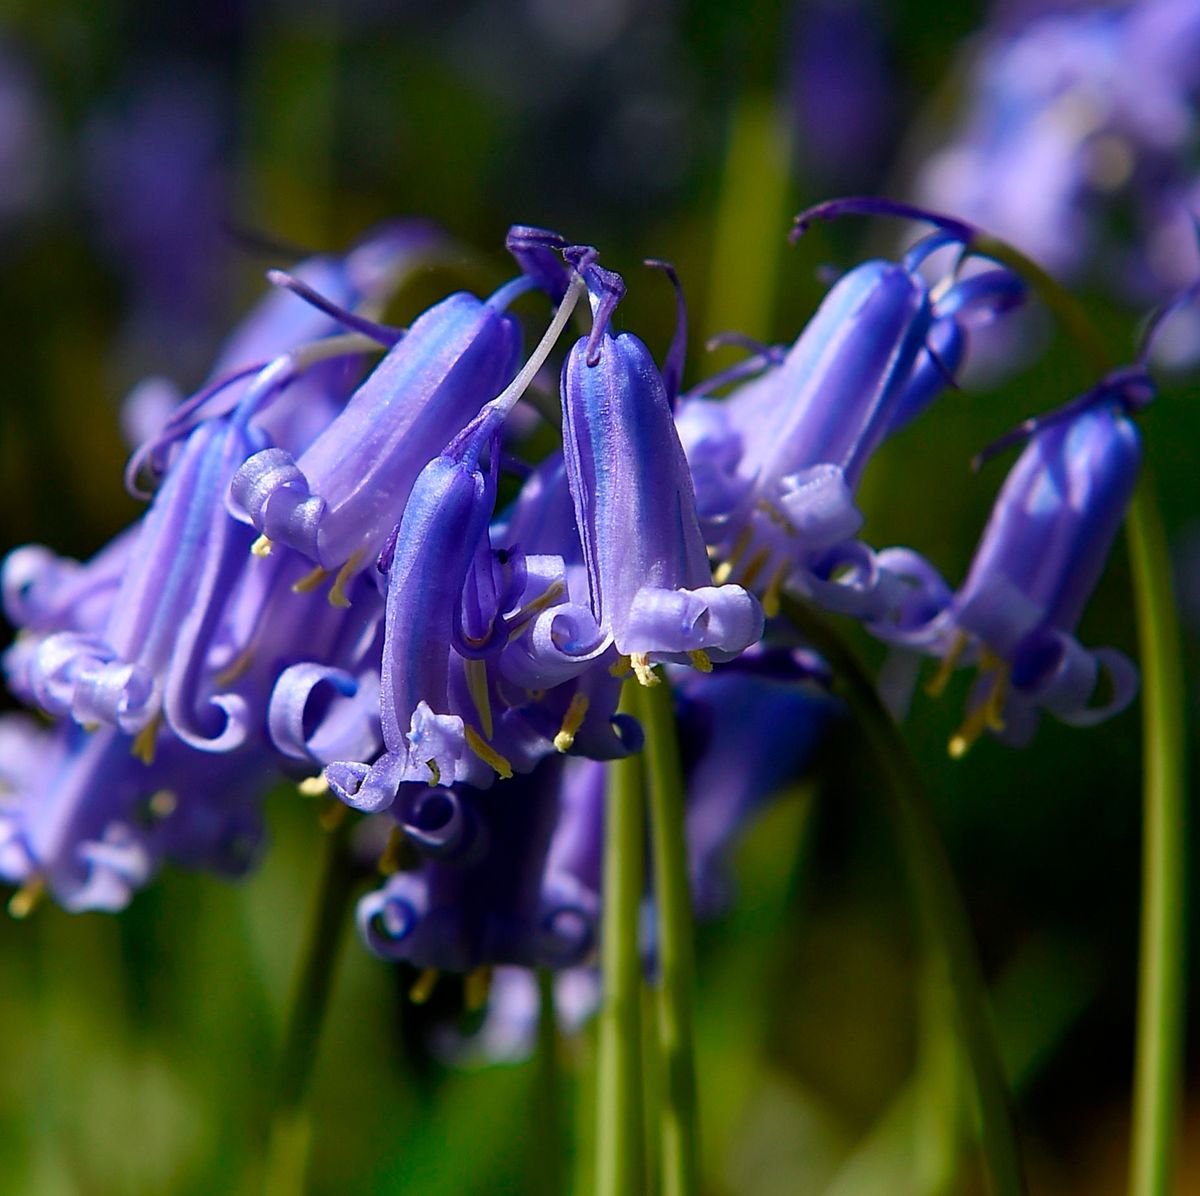 https://hips.hearstapps.com/hmg-prod/images/tips-for-planting-bluebells-1618498617.jpg?crop=0.711xw:1.00xh;0.114xw,0&resize=1200:*